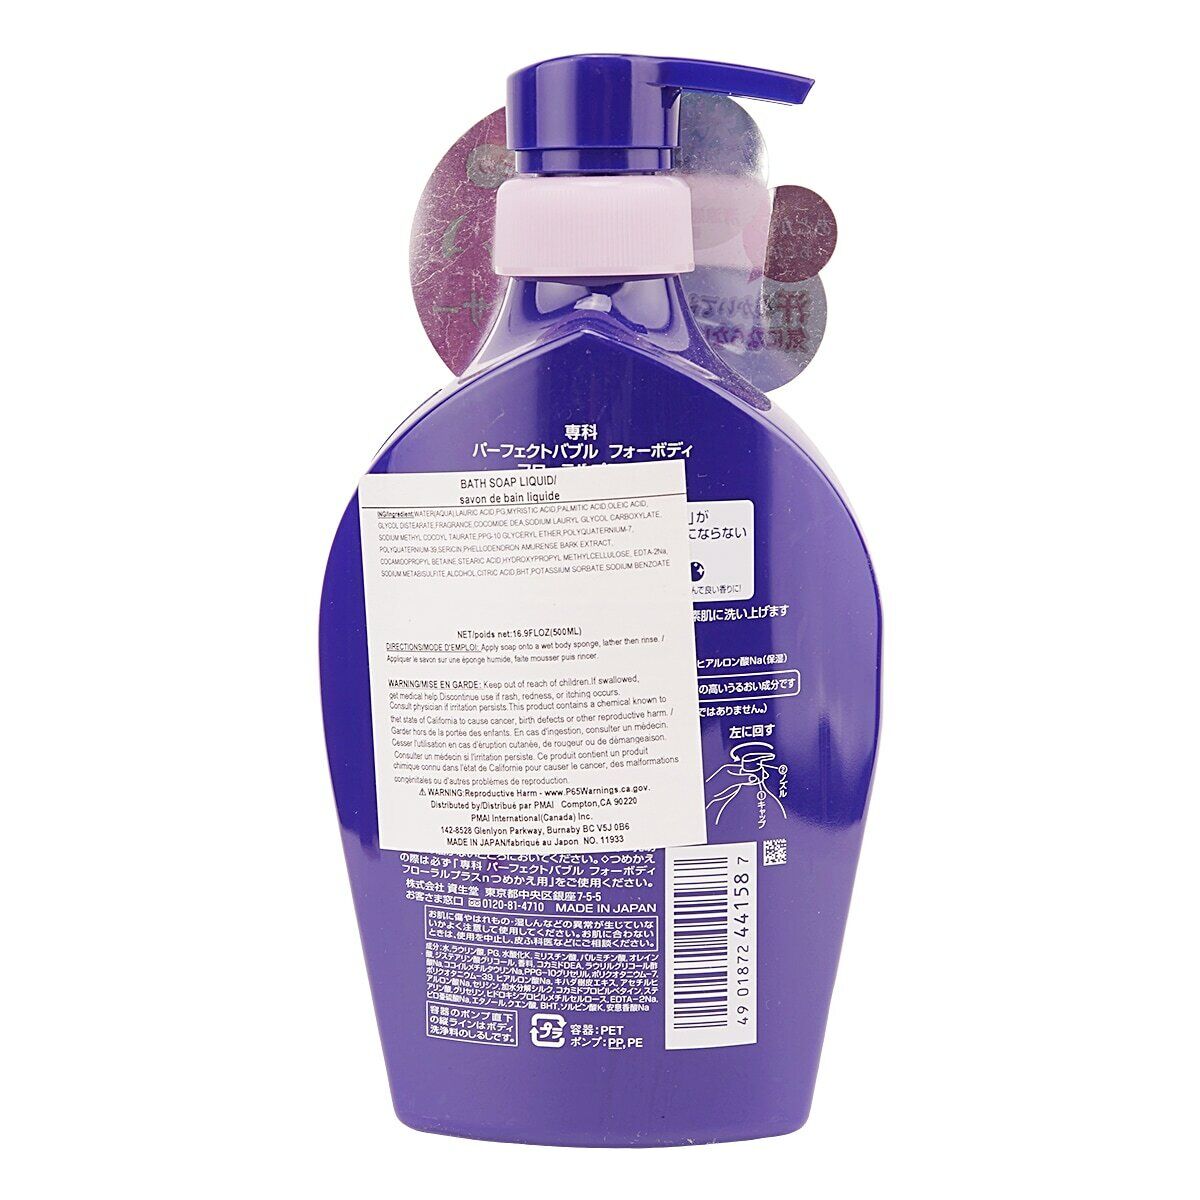 Shiseido Perfect Bubble Body Wash Floral Scent Soothing Moisturizing 500ml NEW